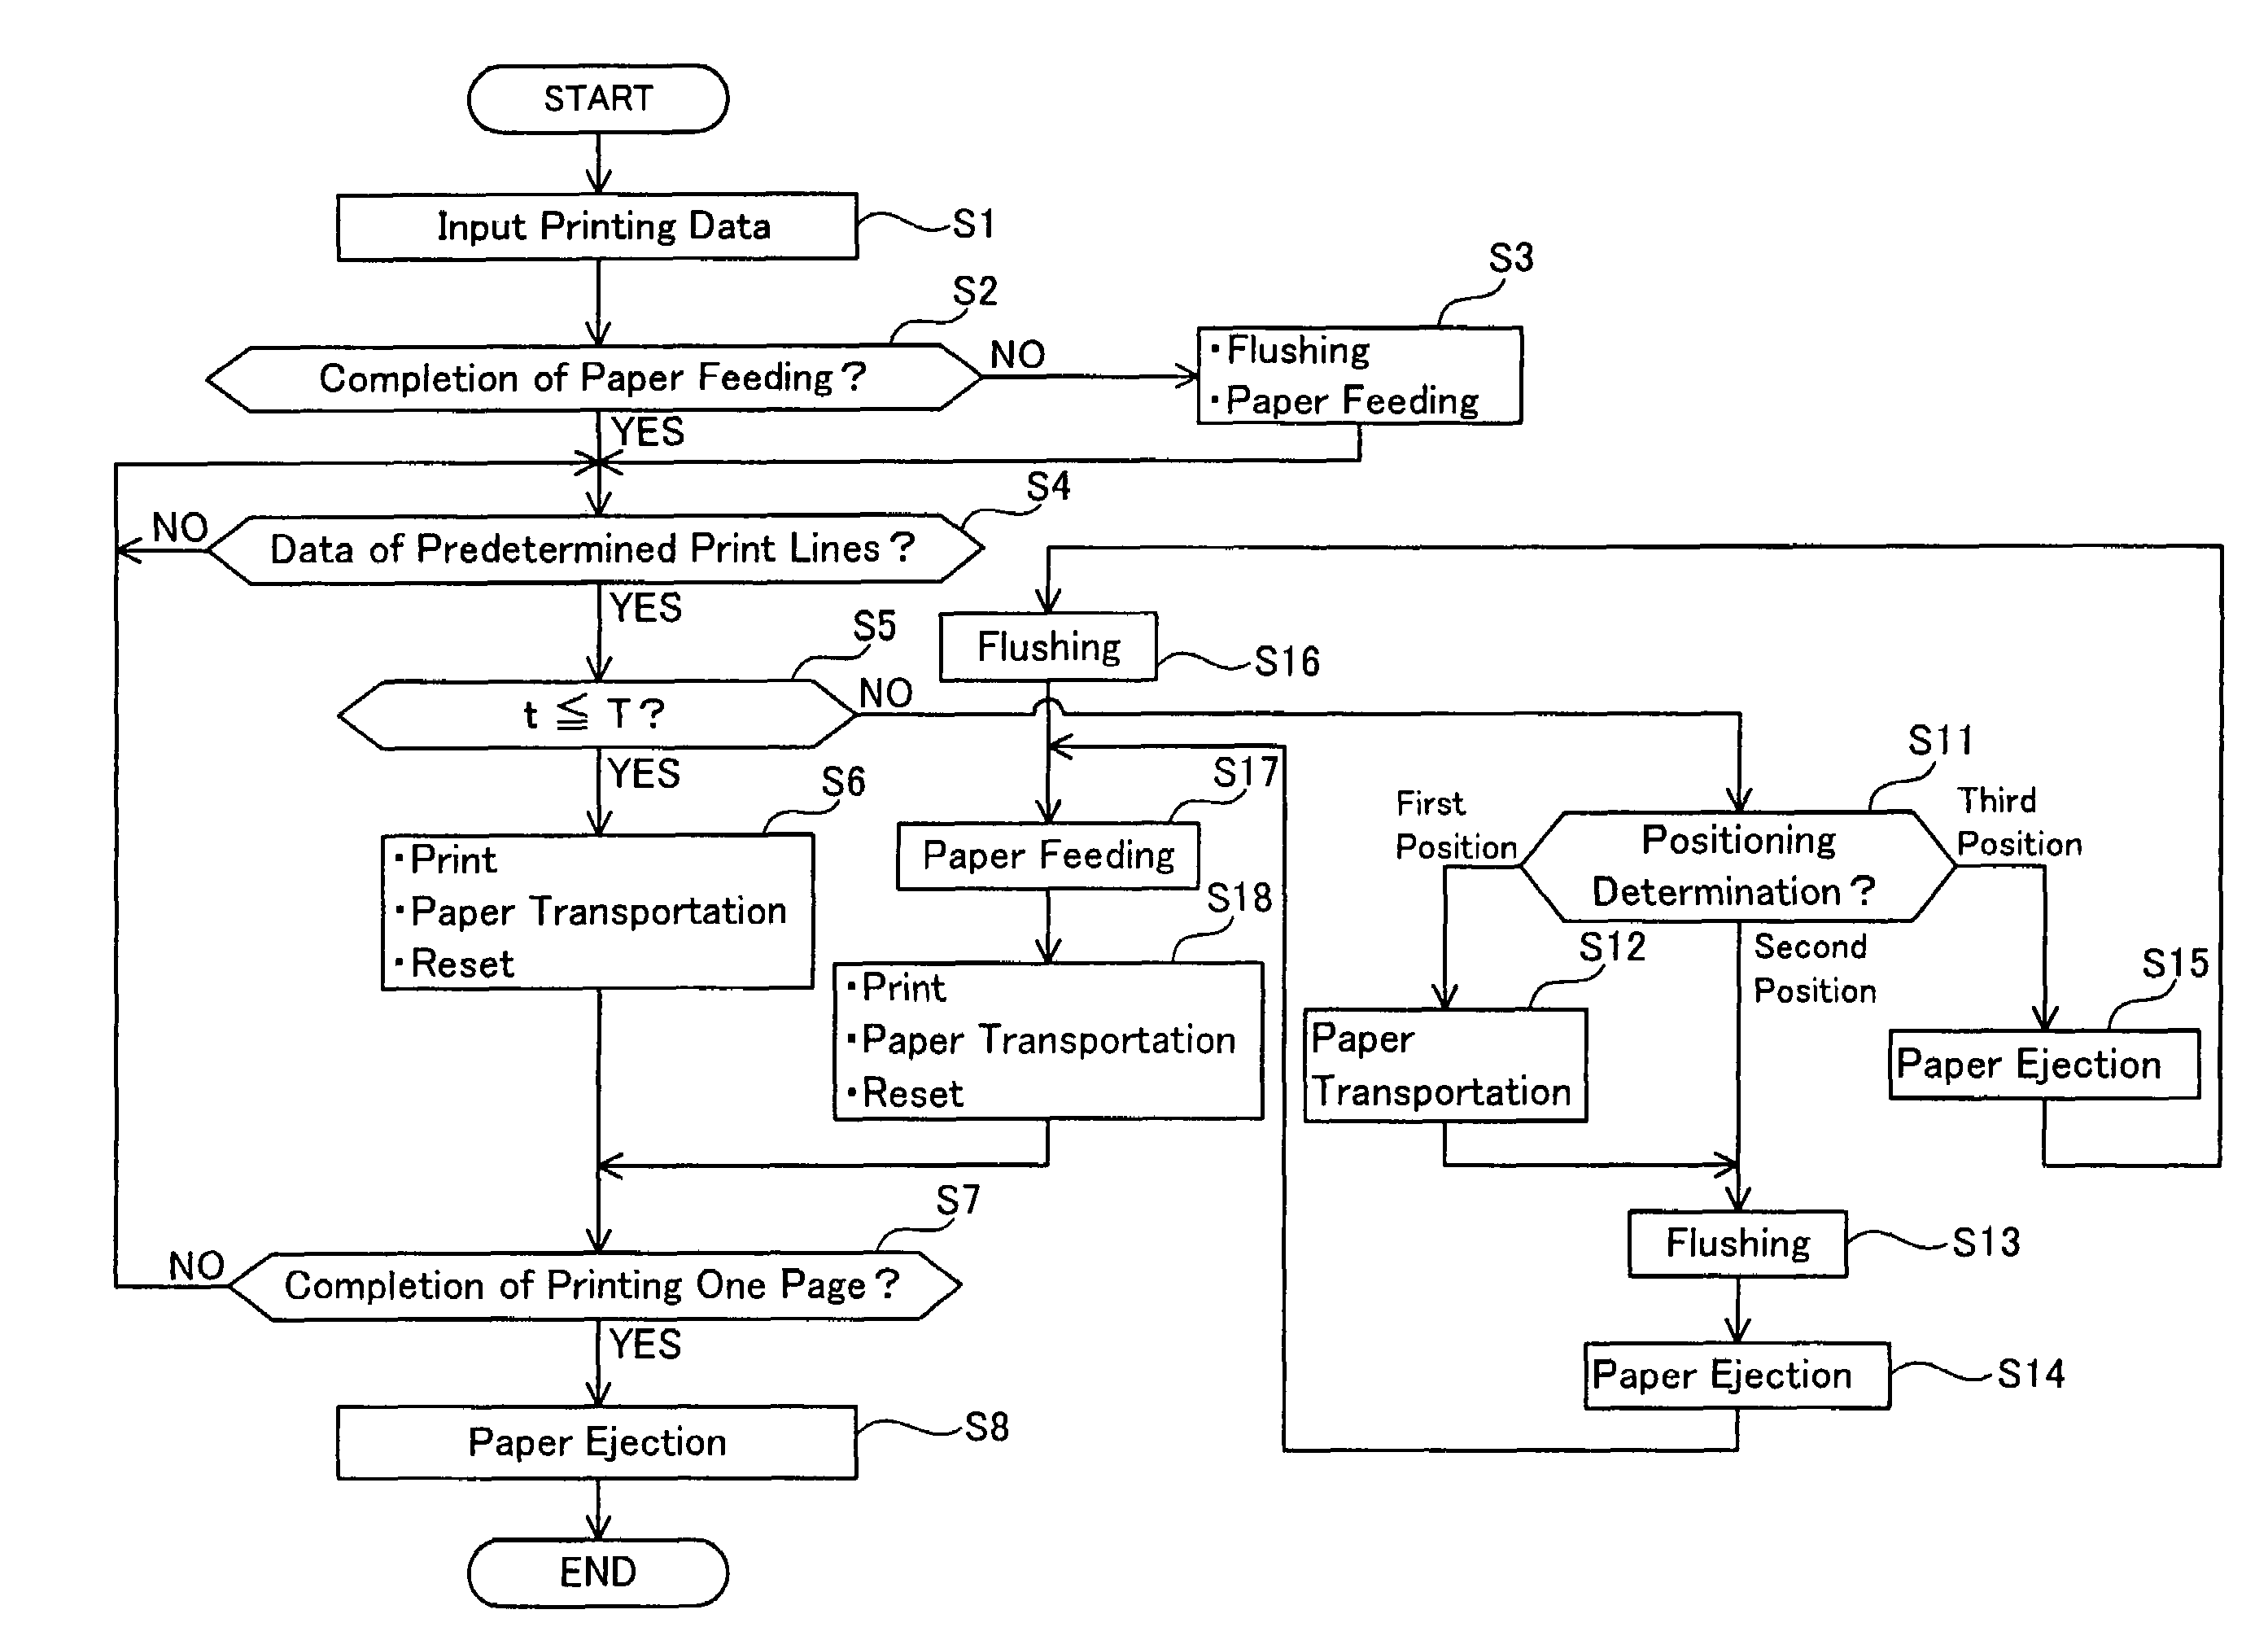 Ink jet printer, method for controlling an ink jet printer, and computer program product for an ink jet printer